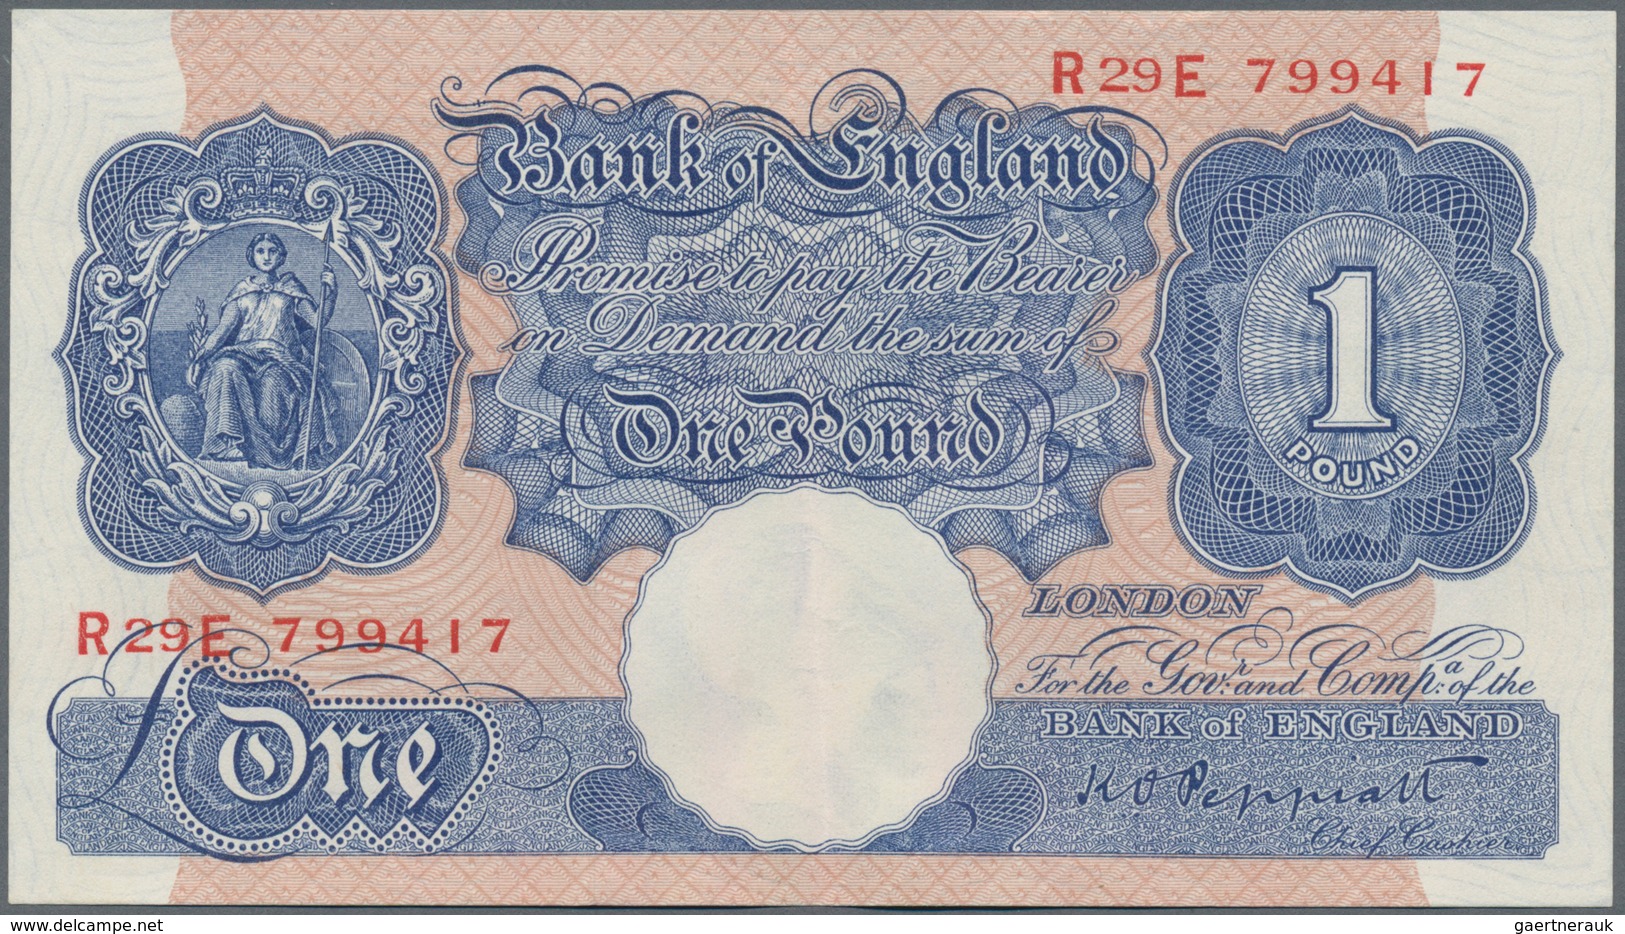 Alle Welt: Very nice lot with 24 banknotes containing Great Britain 2 x 1 Pound ND(1940-48) in VF, F